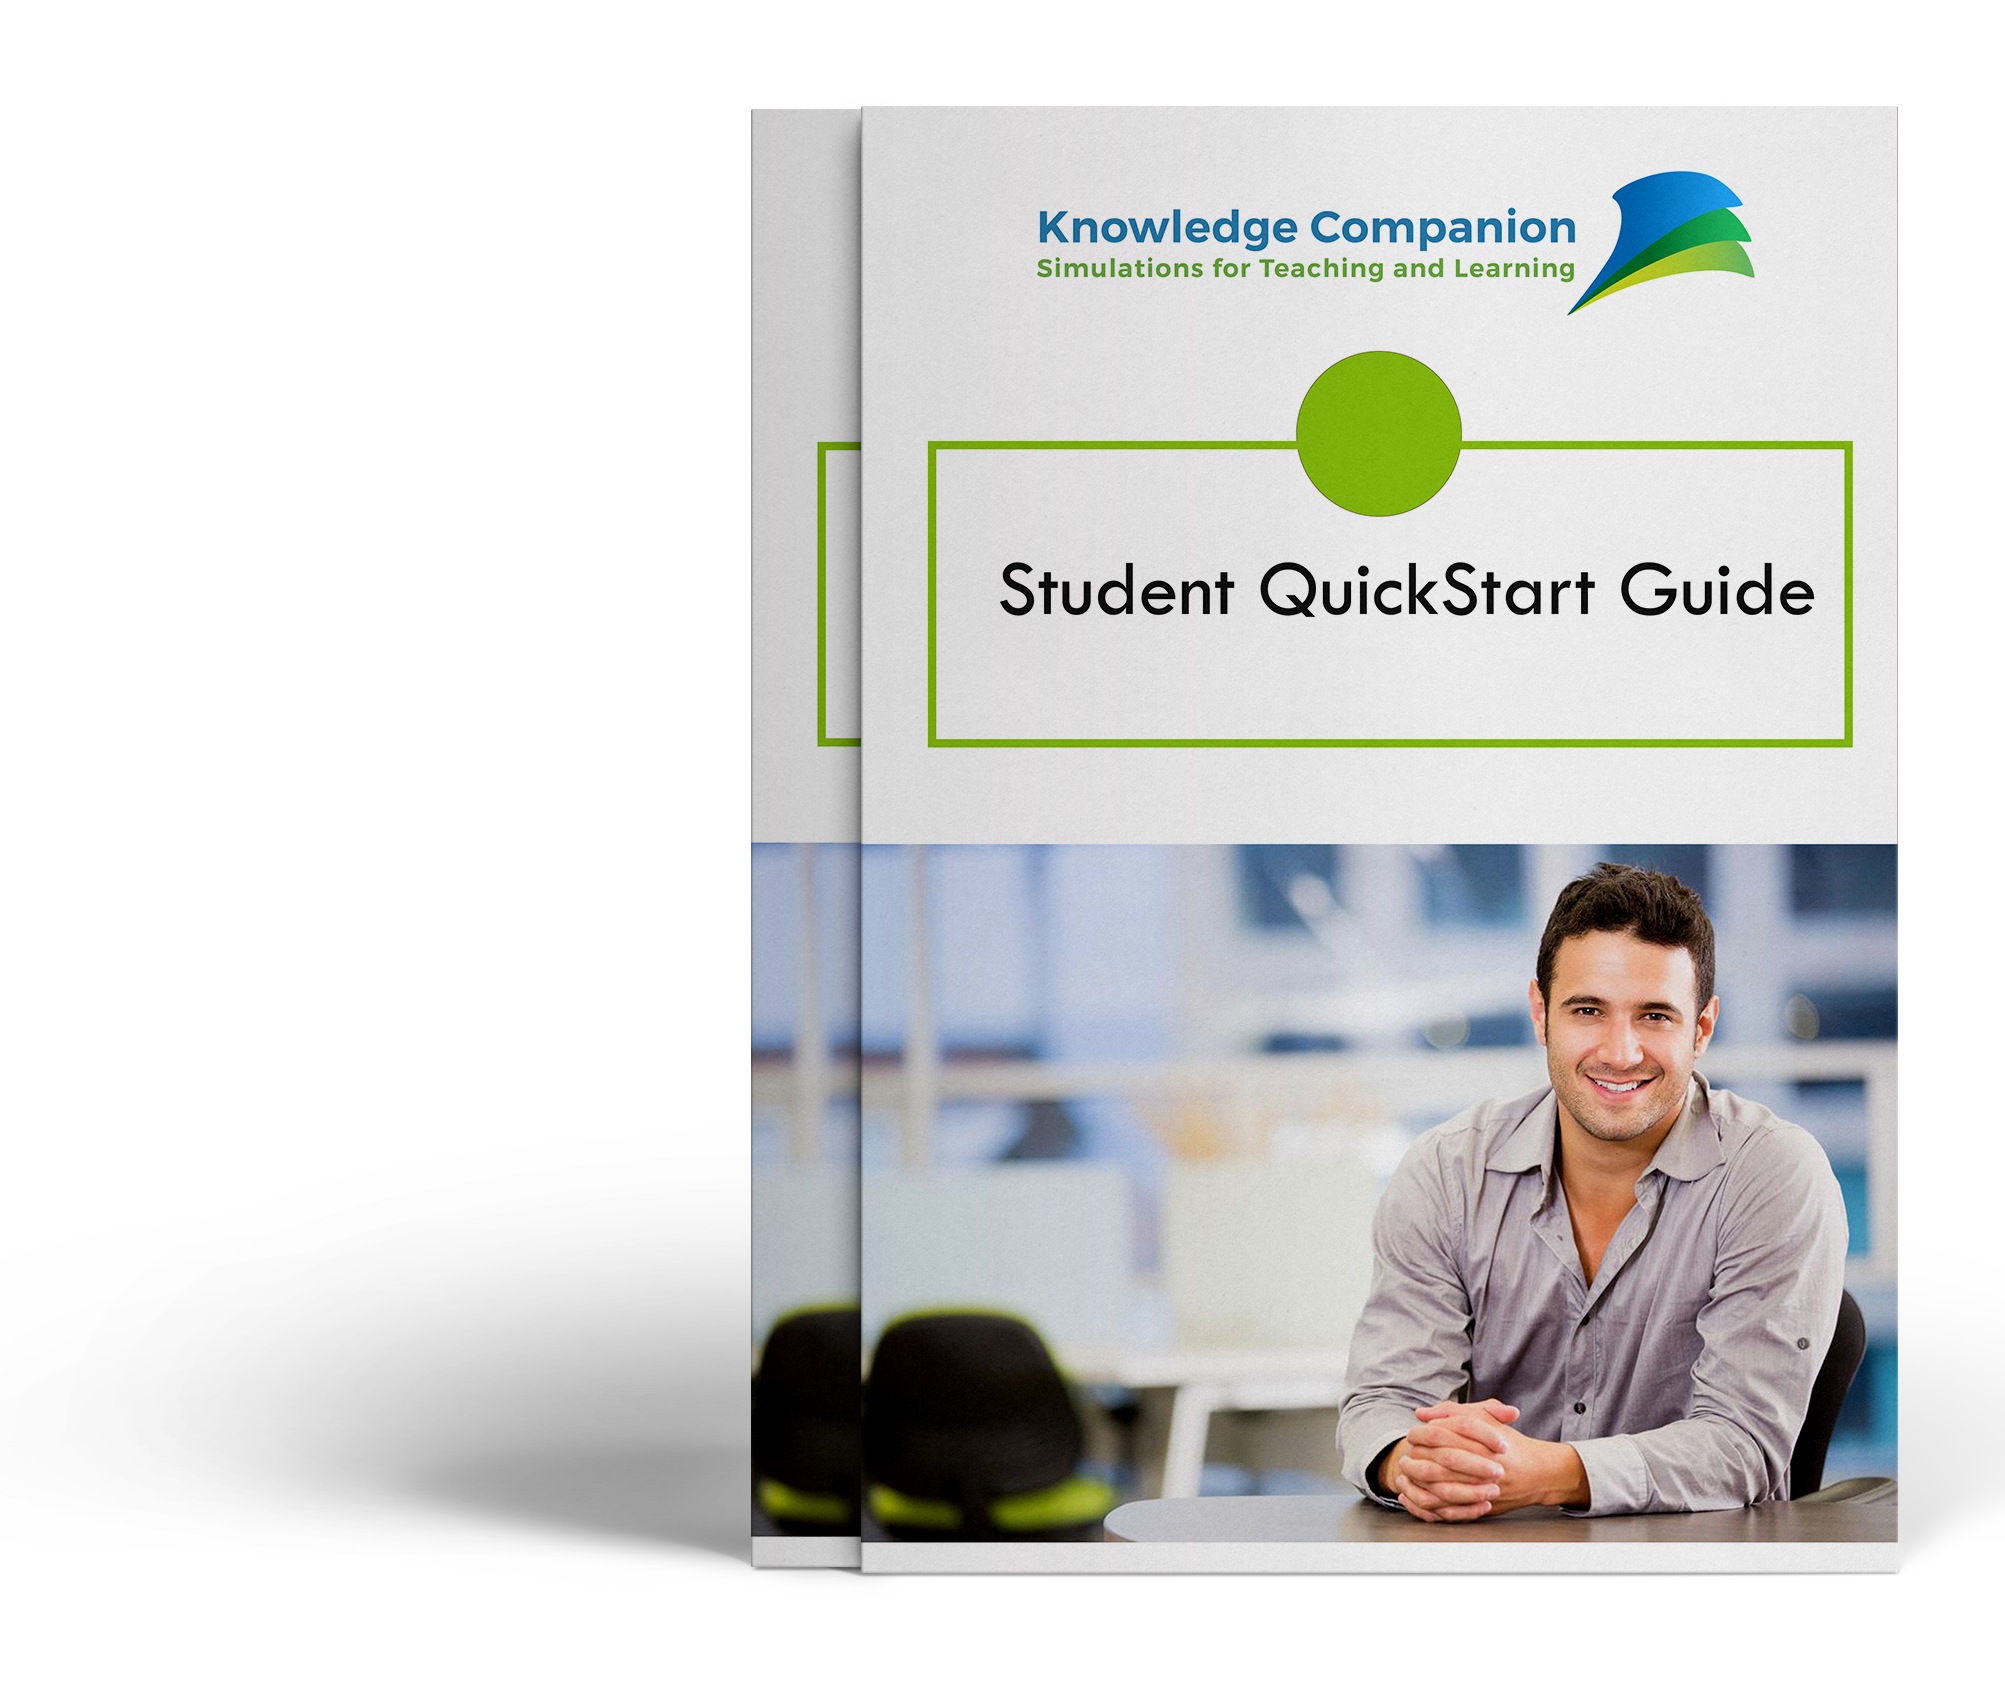 Click on the guide to get started!